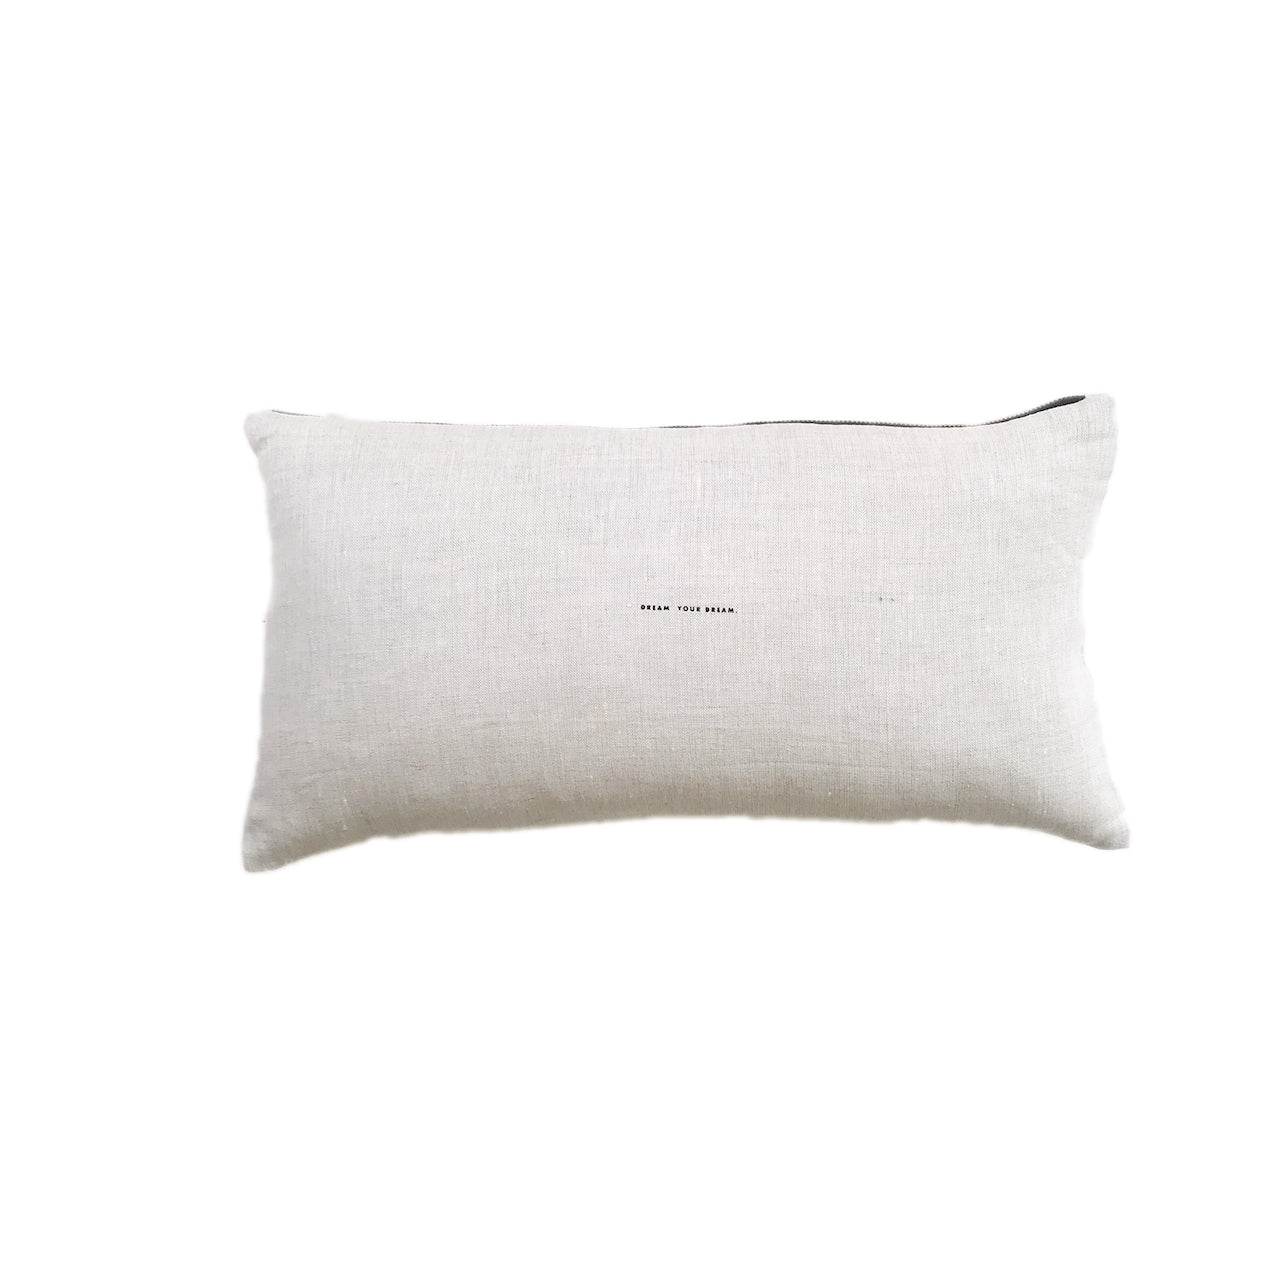 DREAM YOUR DREAM / BE TRUE TO WHO YOU ARE PILLOW COVER